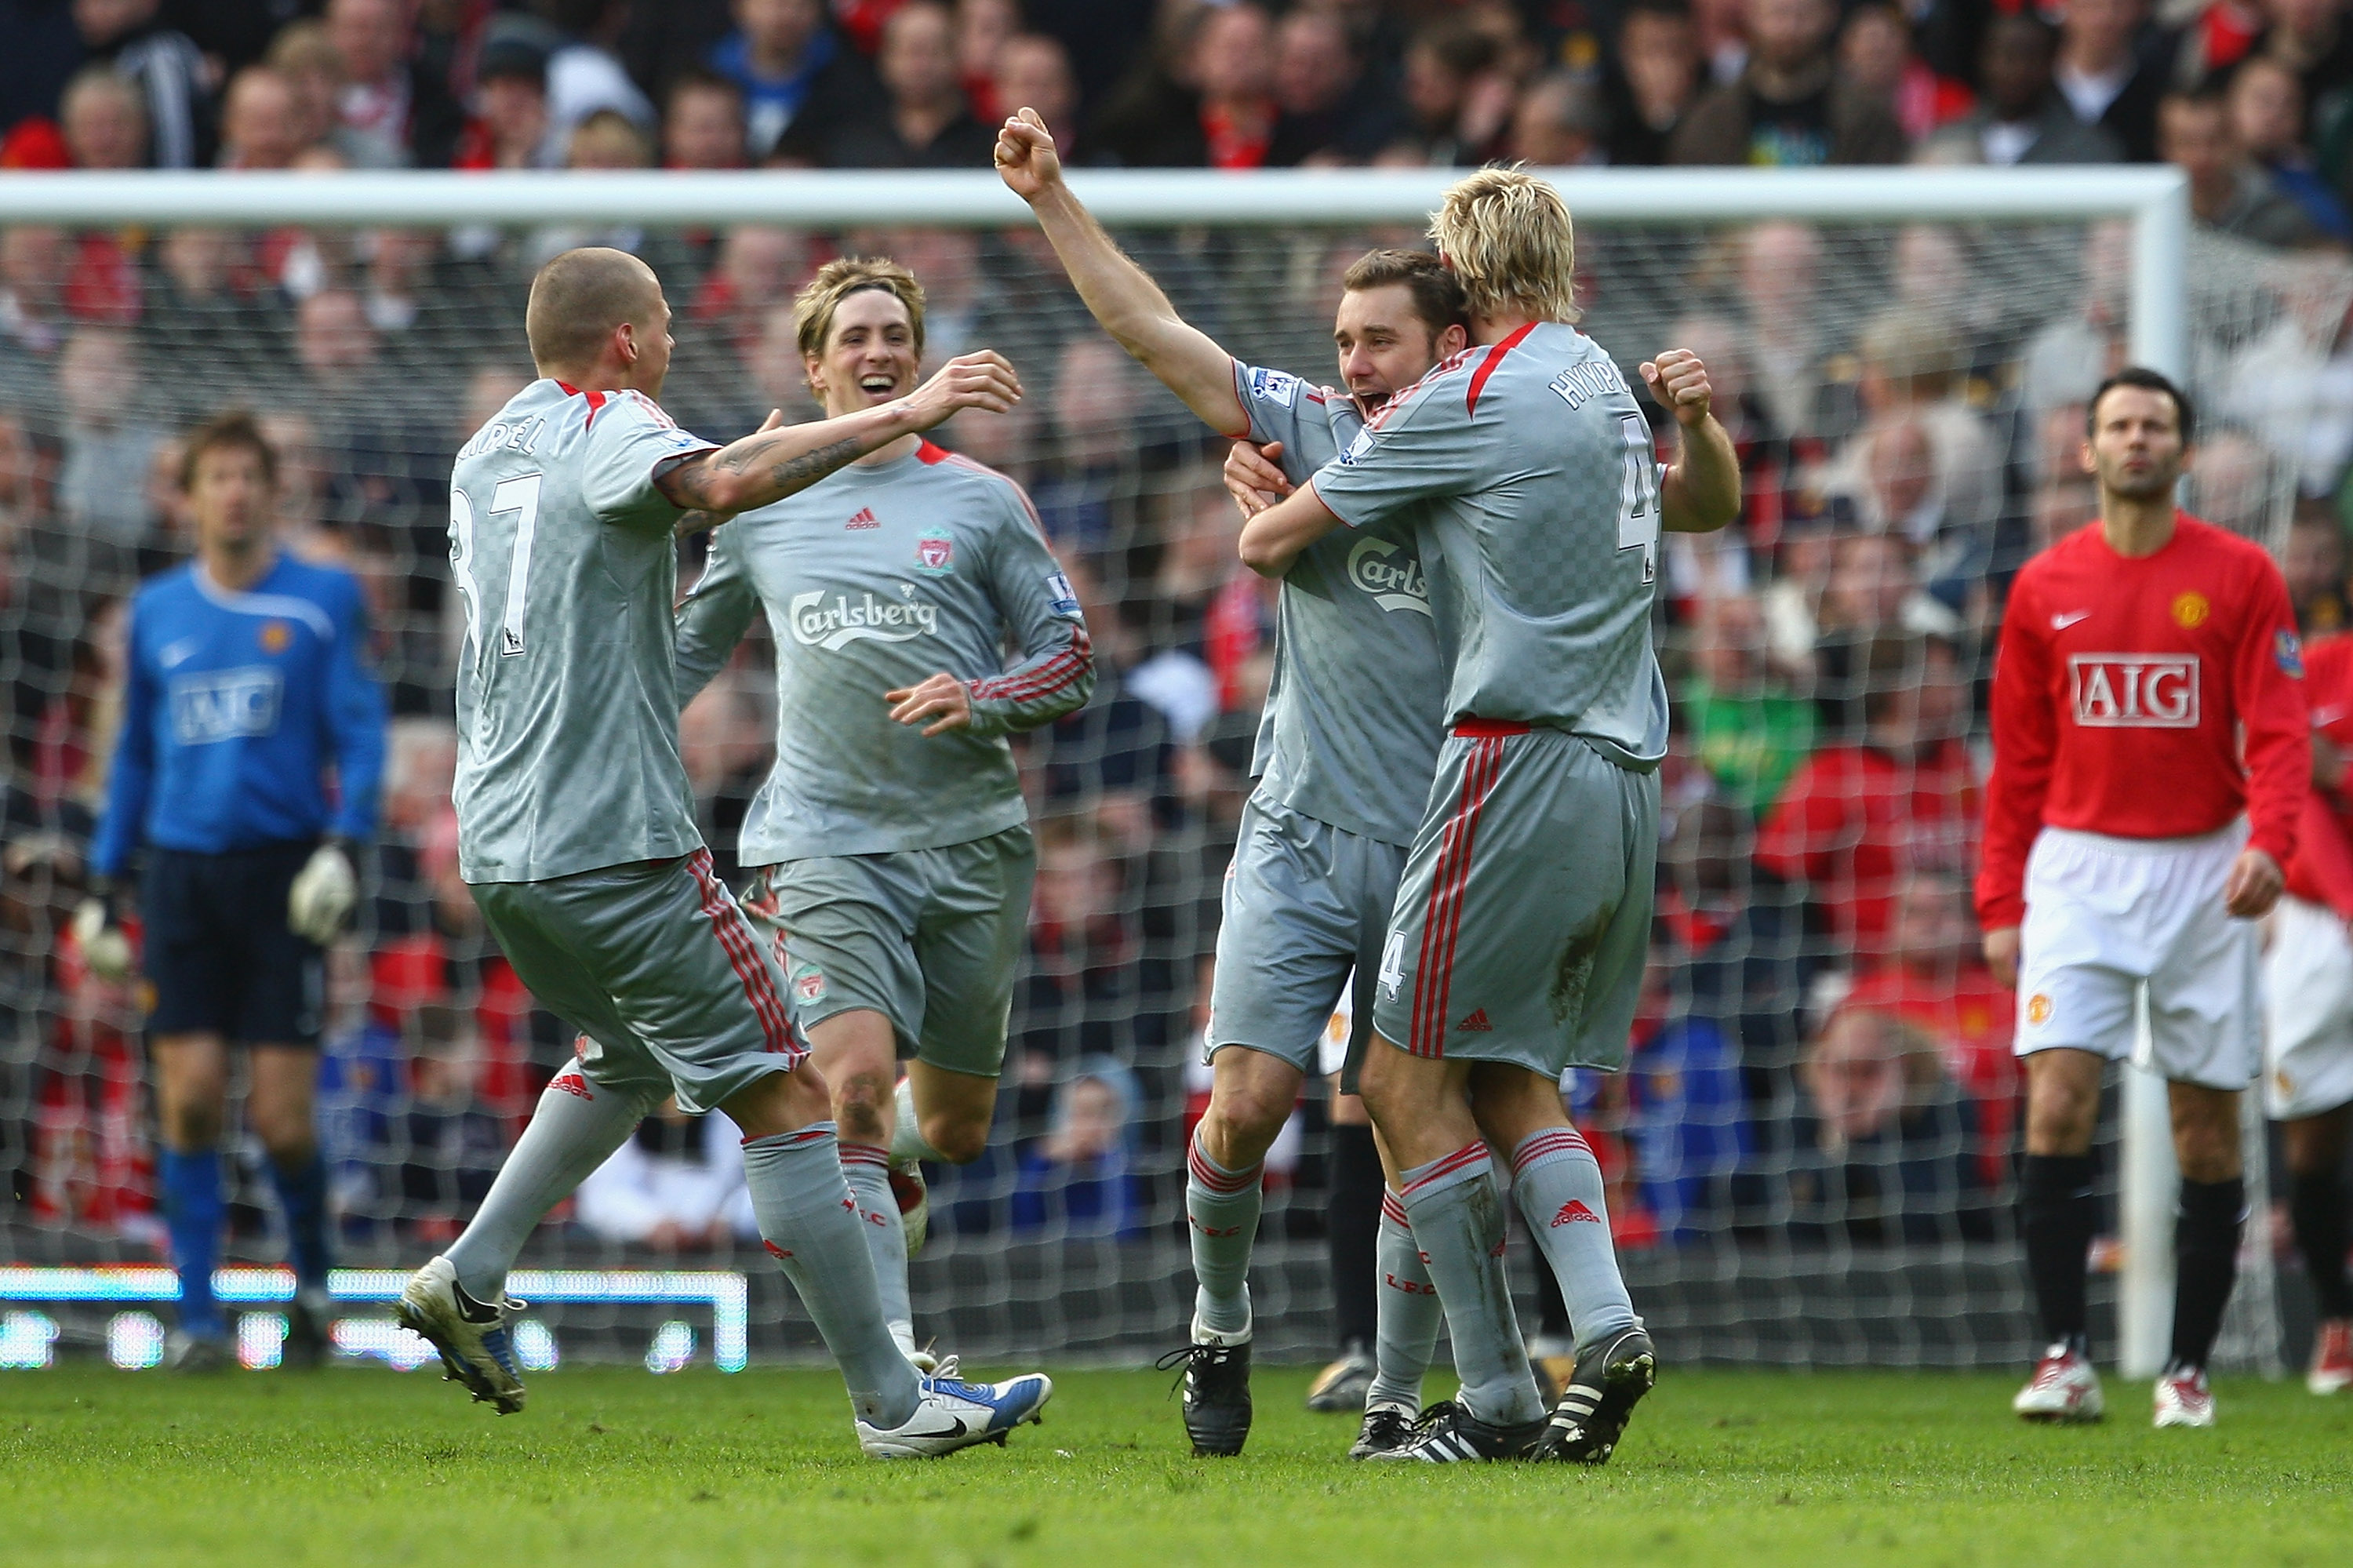 MANCHESTER, UNITED KINGDOM - MARCH 14:  Fabio Aurelio of Liverpool celebrates scoring his team's third goal with his team mates during the Barclays Premier League match between Manchester United and Liverpool at Old Trafford on March 14, 2009 in Mancheste